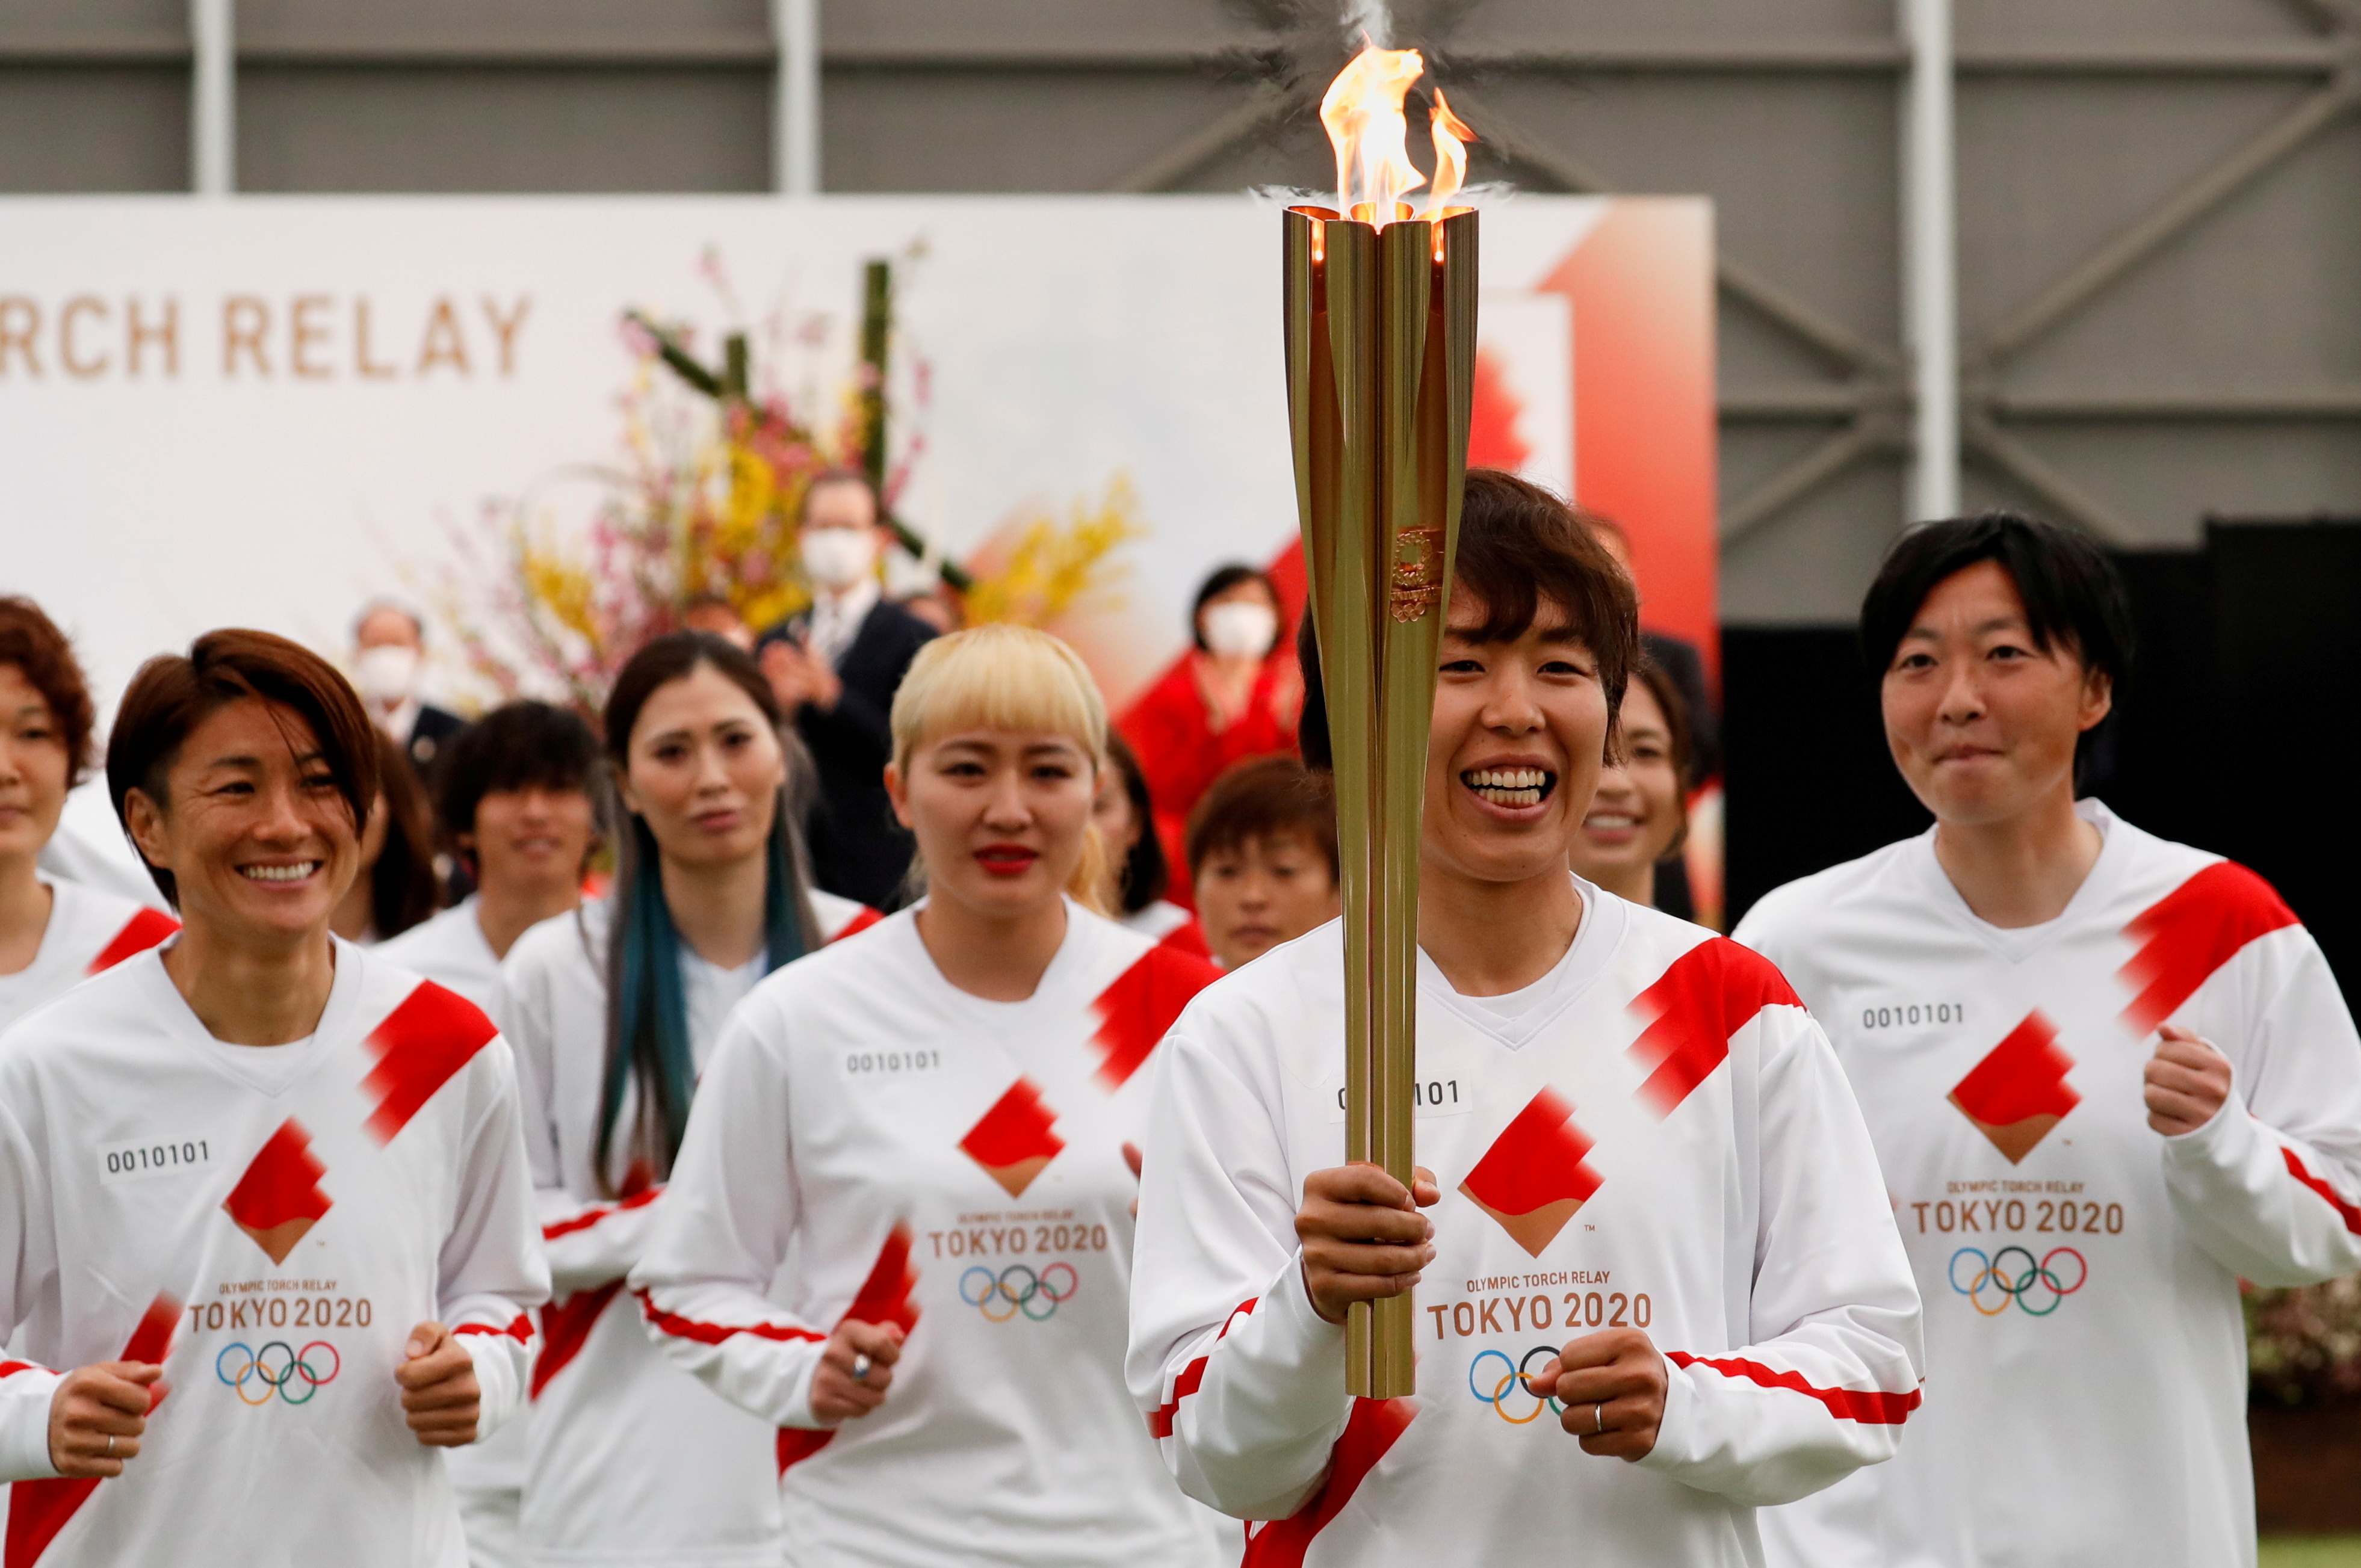 Tokyo 2020 Olympic torch relay